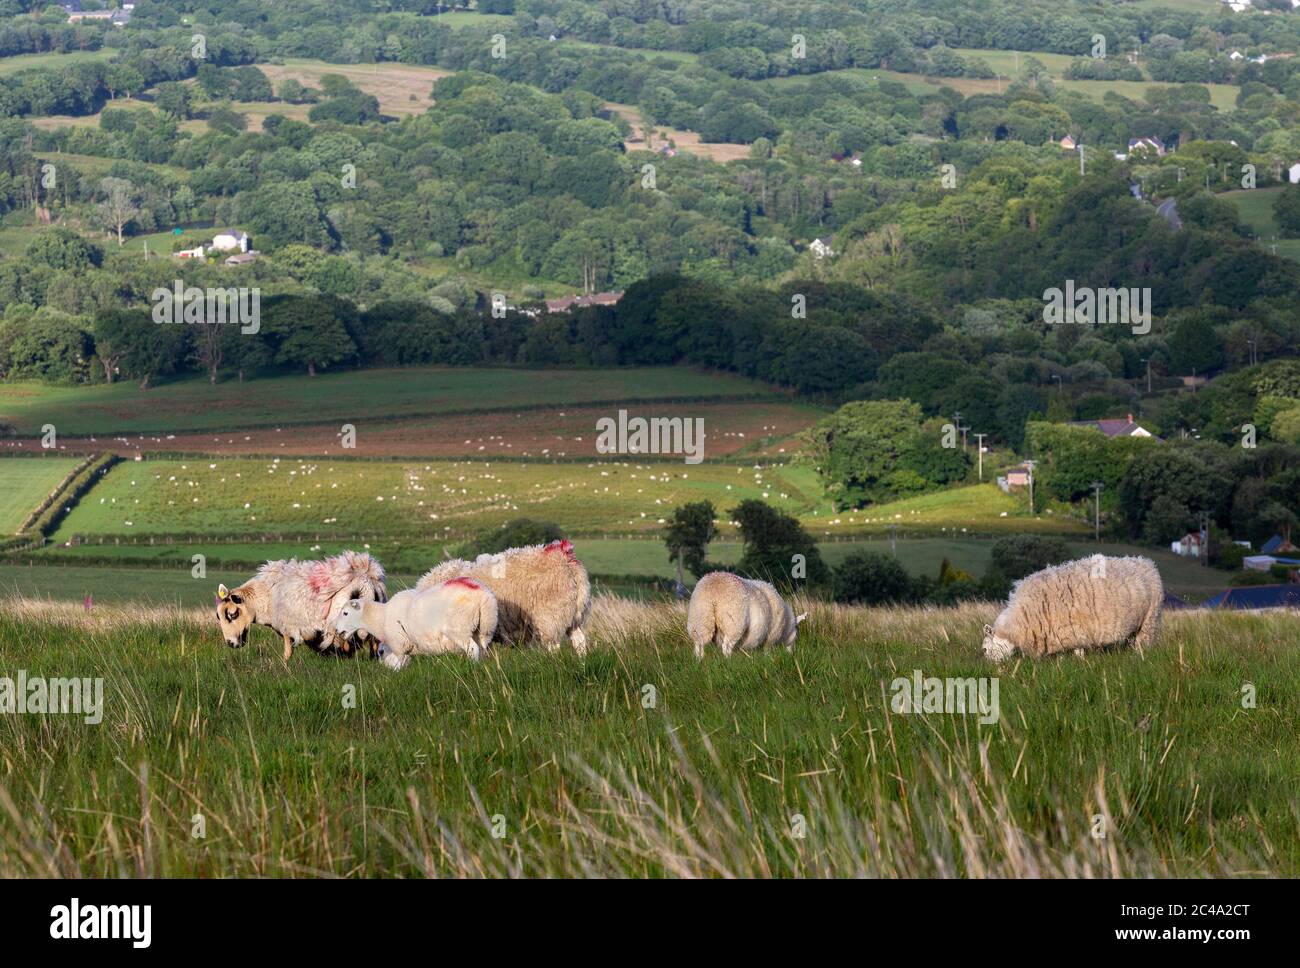 Sheep grazing on a hill Stock Photo